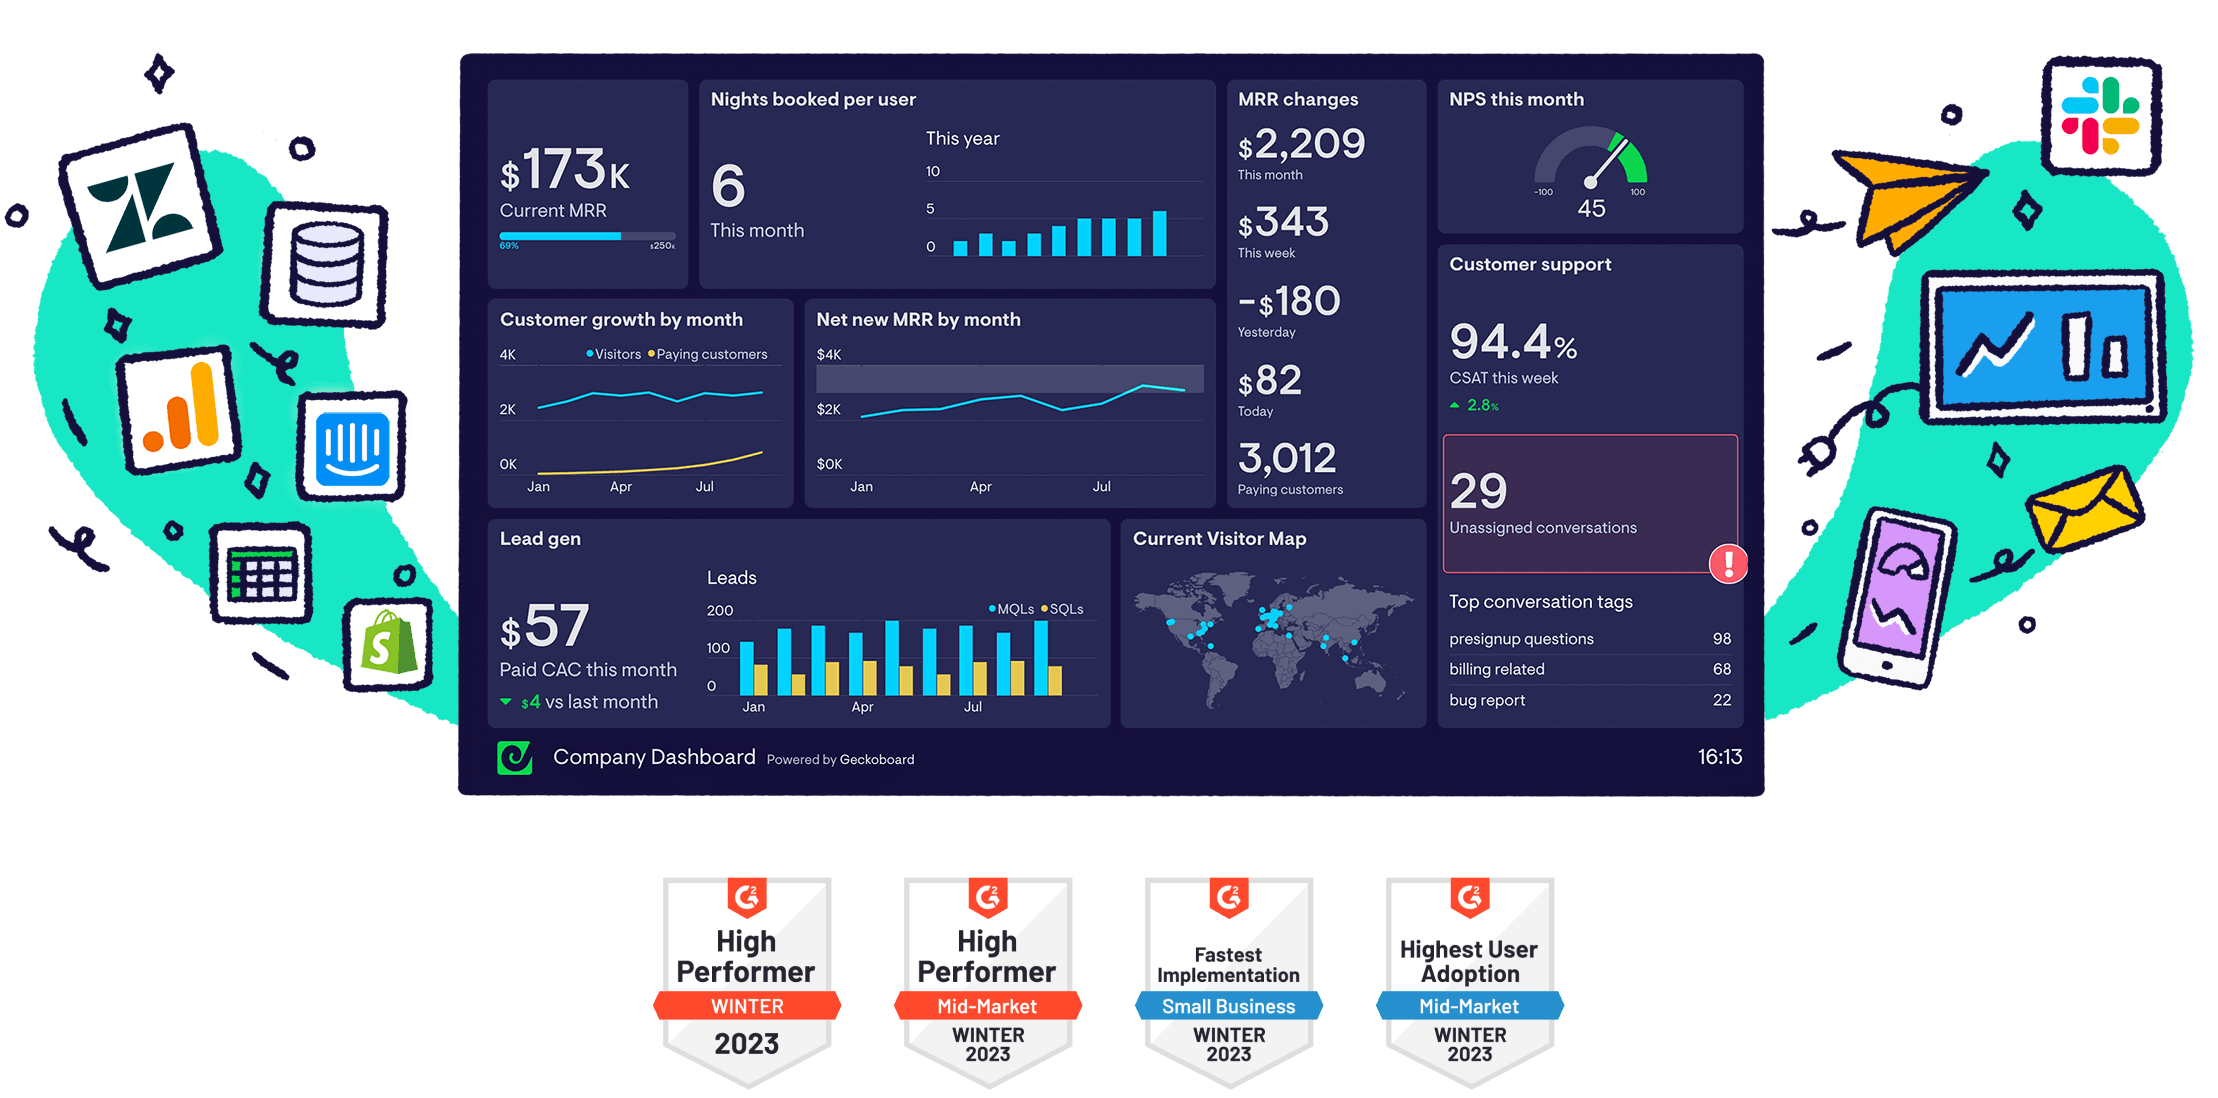 Real-time data, KPI and metrics dashboards from Geckoboard